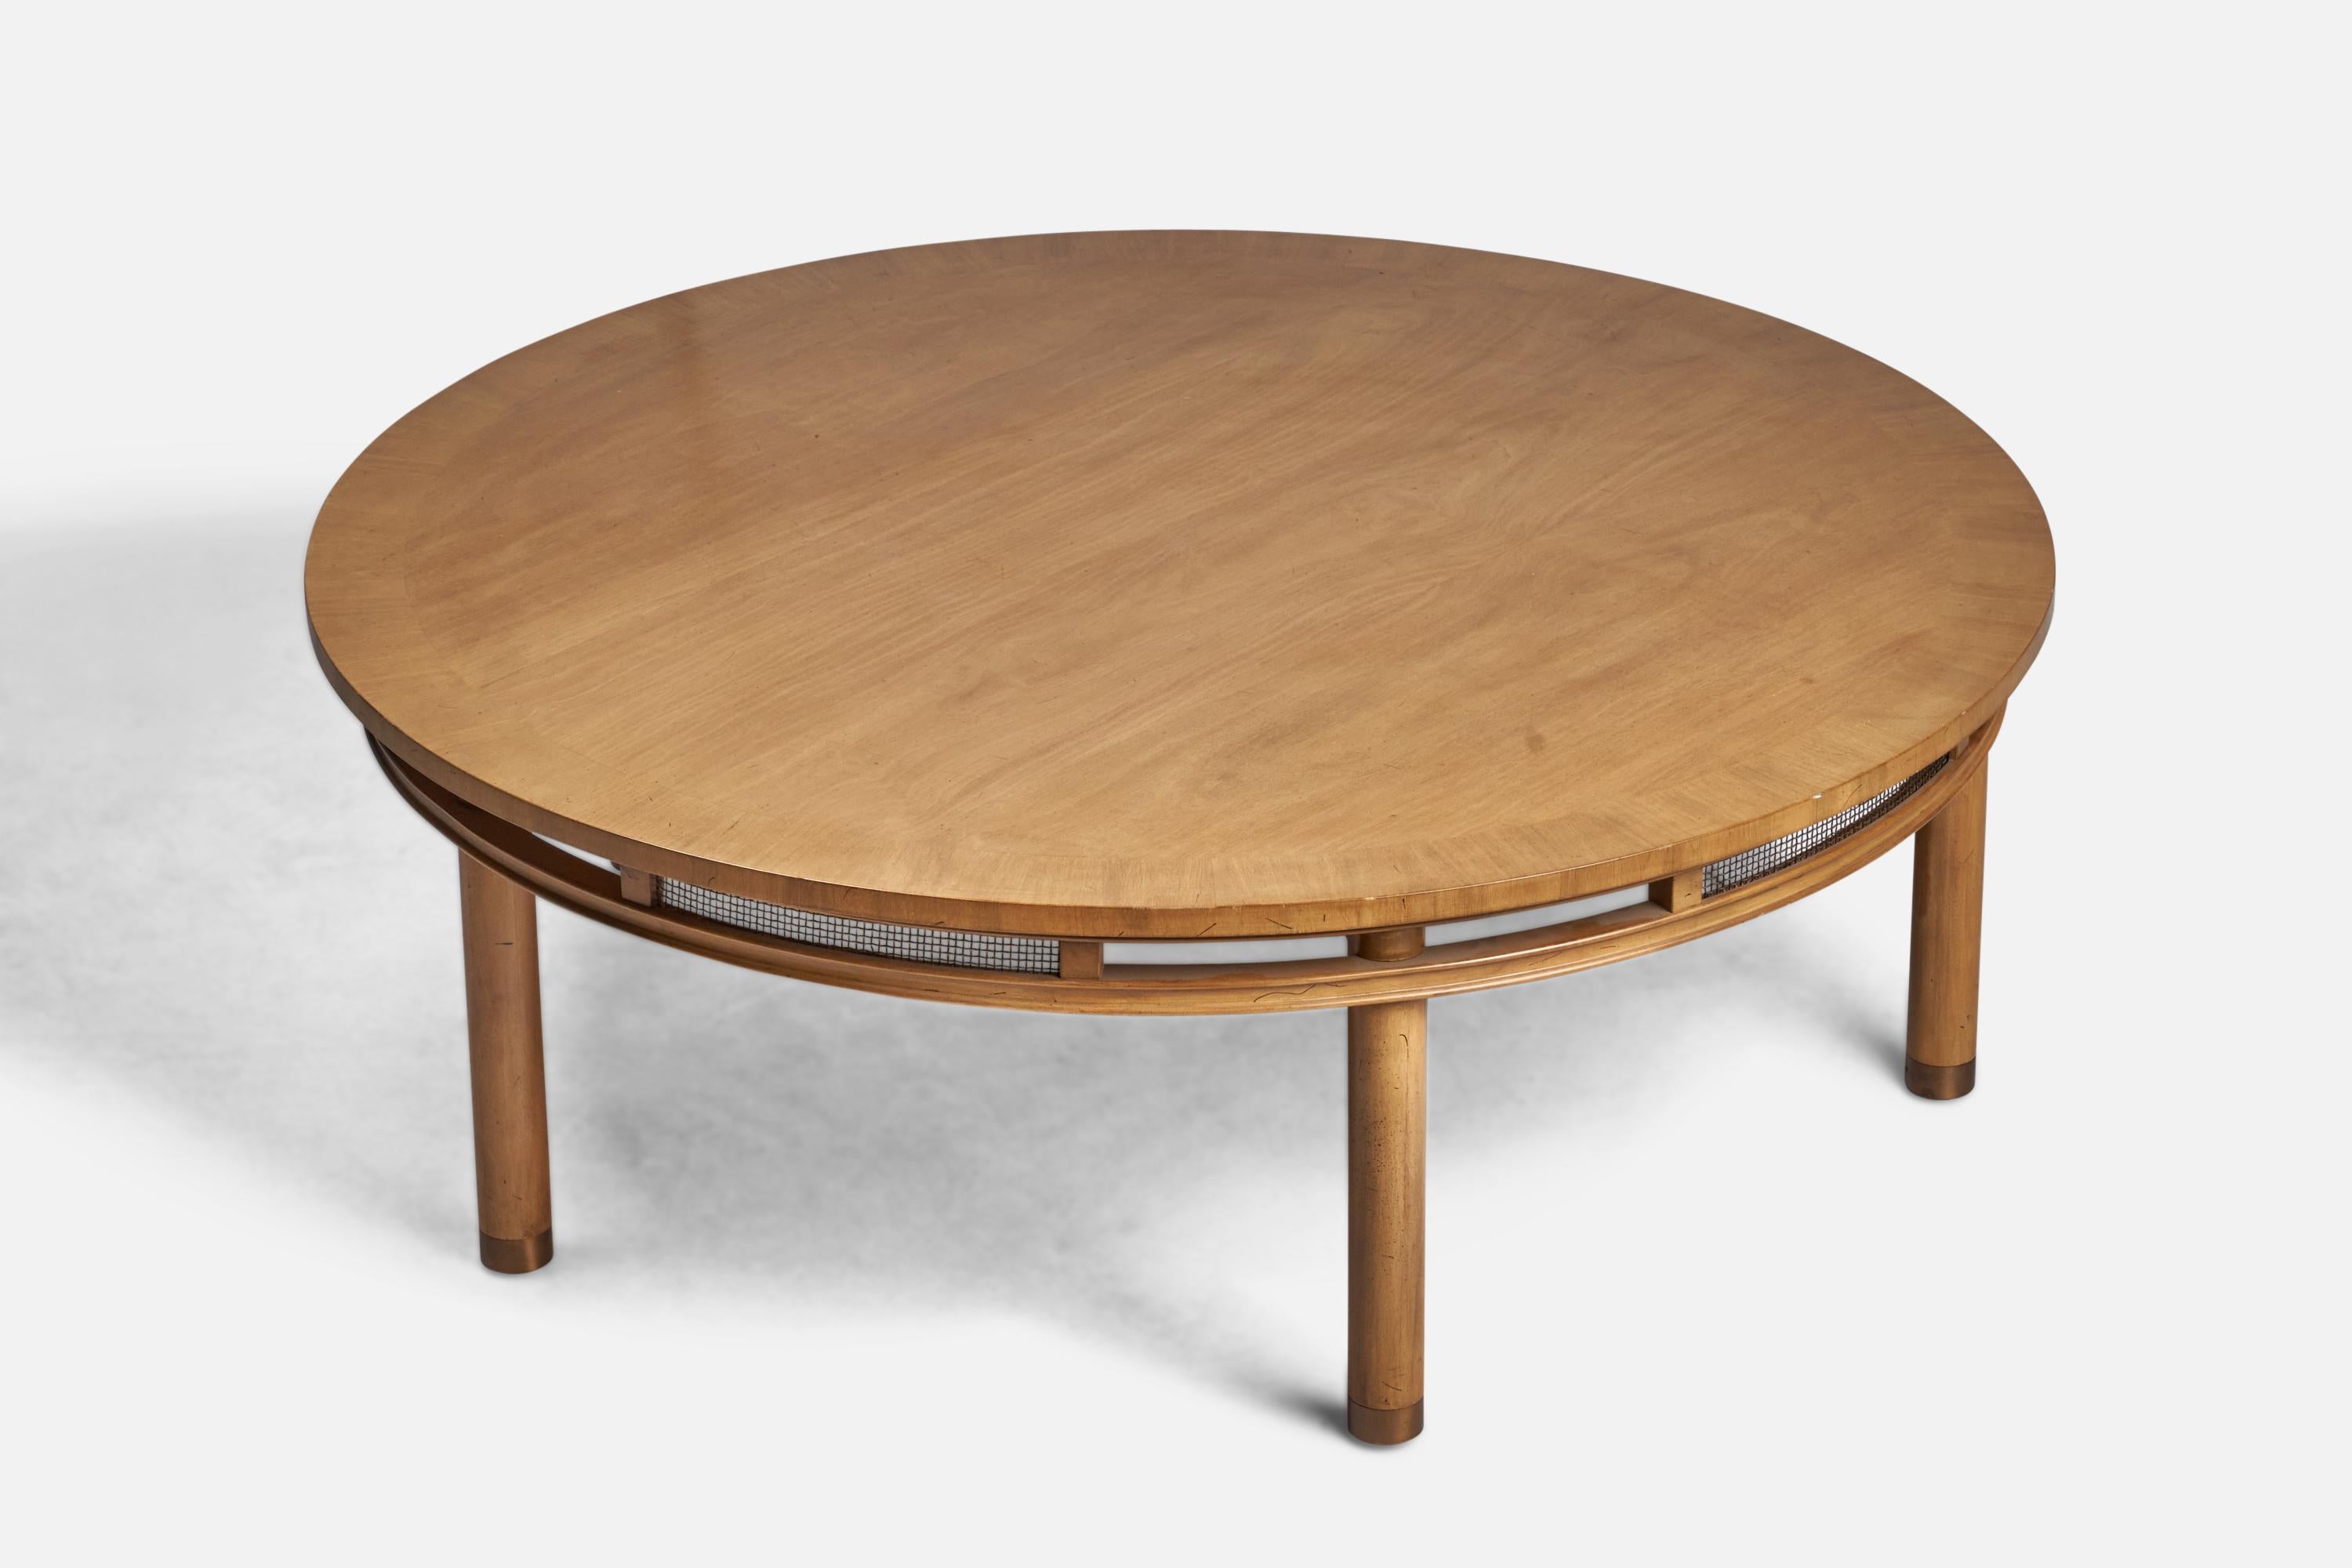 A bleached mahogany, brass and metal string coffee table designed and produced by Bert England, USA, c. 1940s.